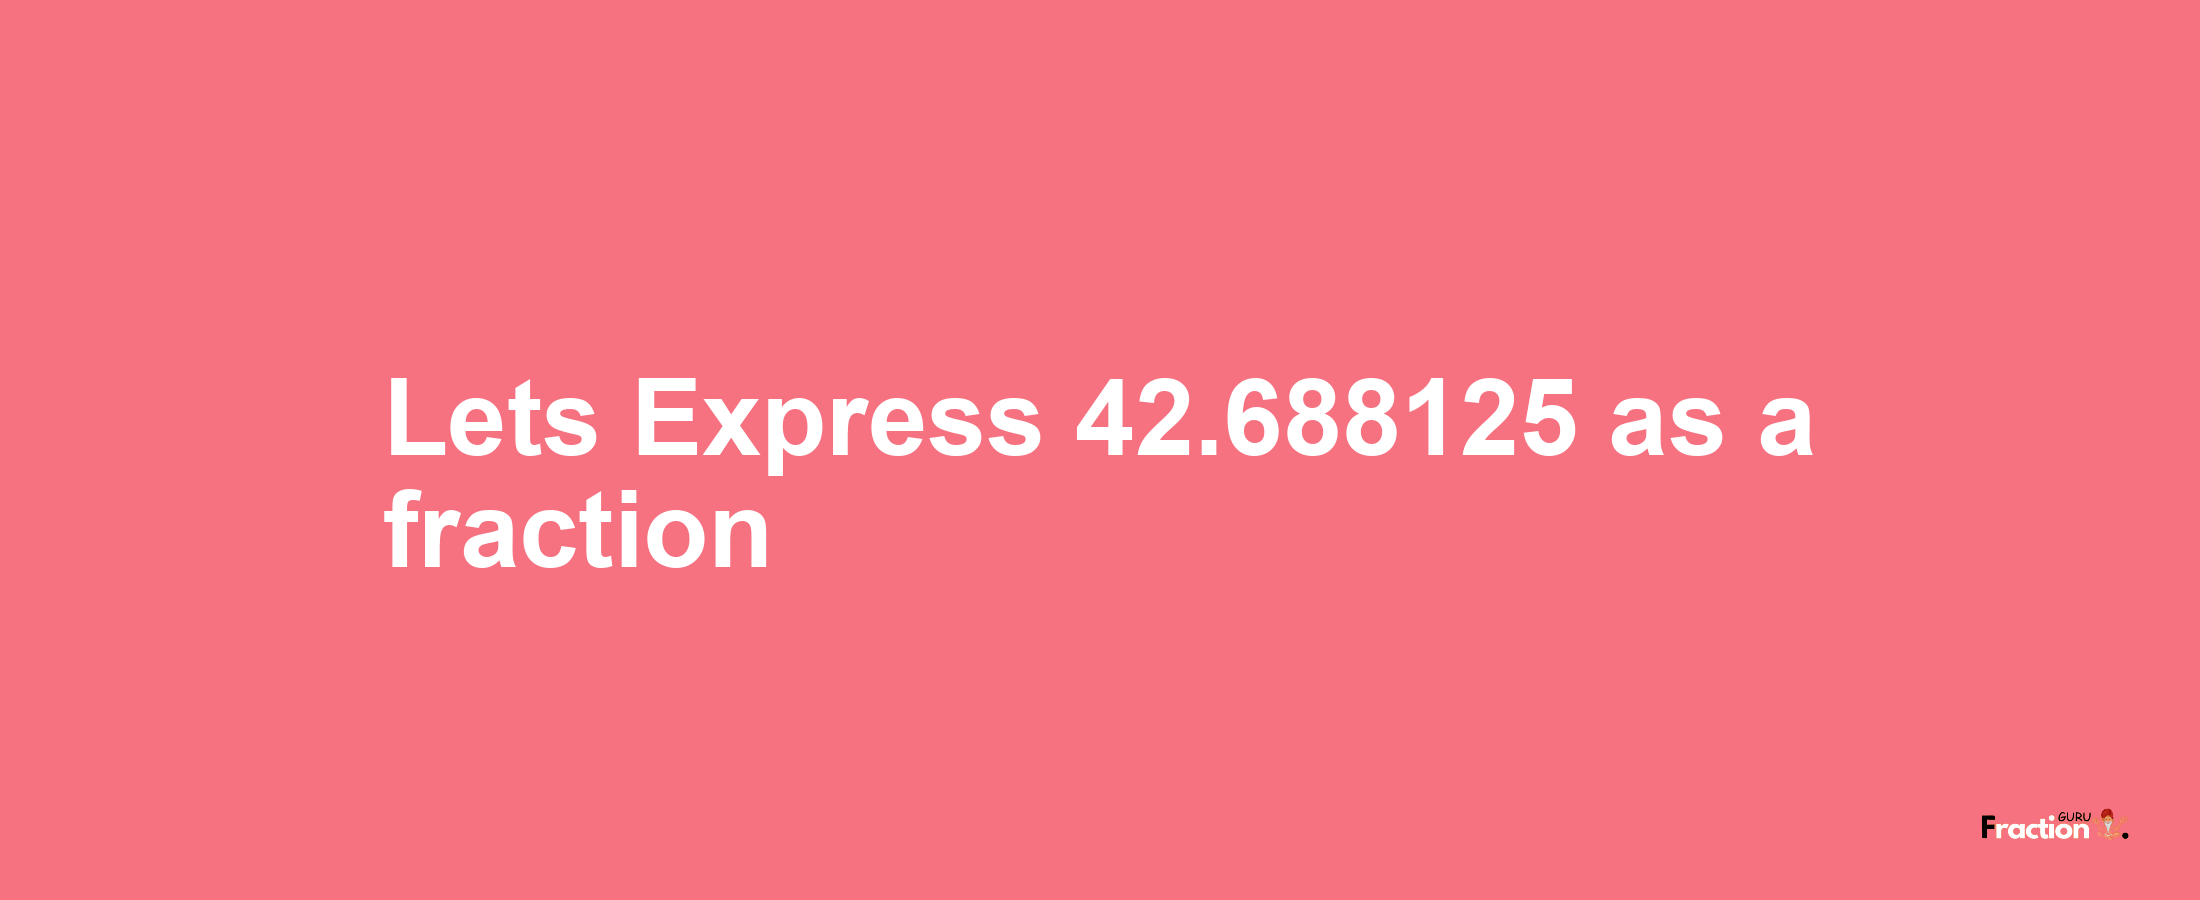 Lets Express 42.688125 as afraction